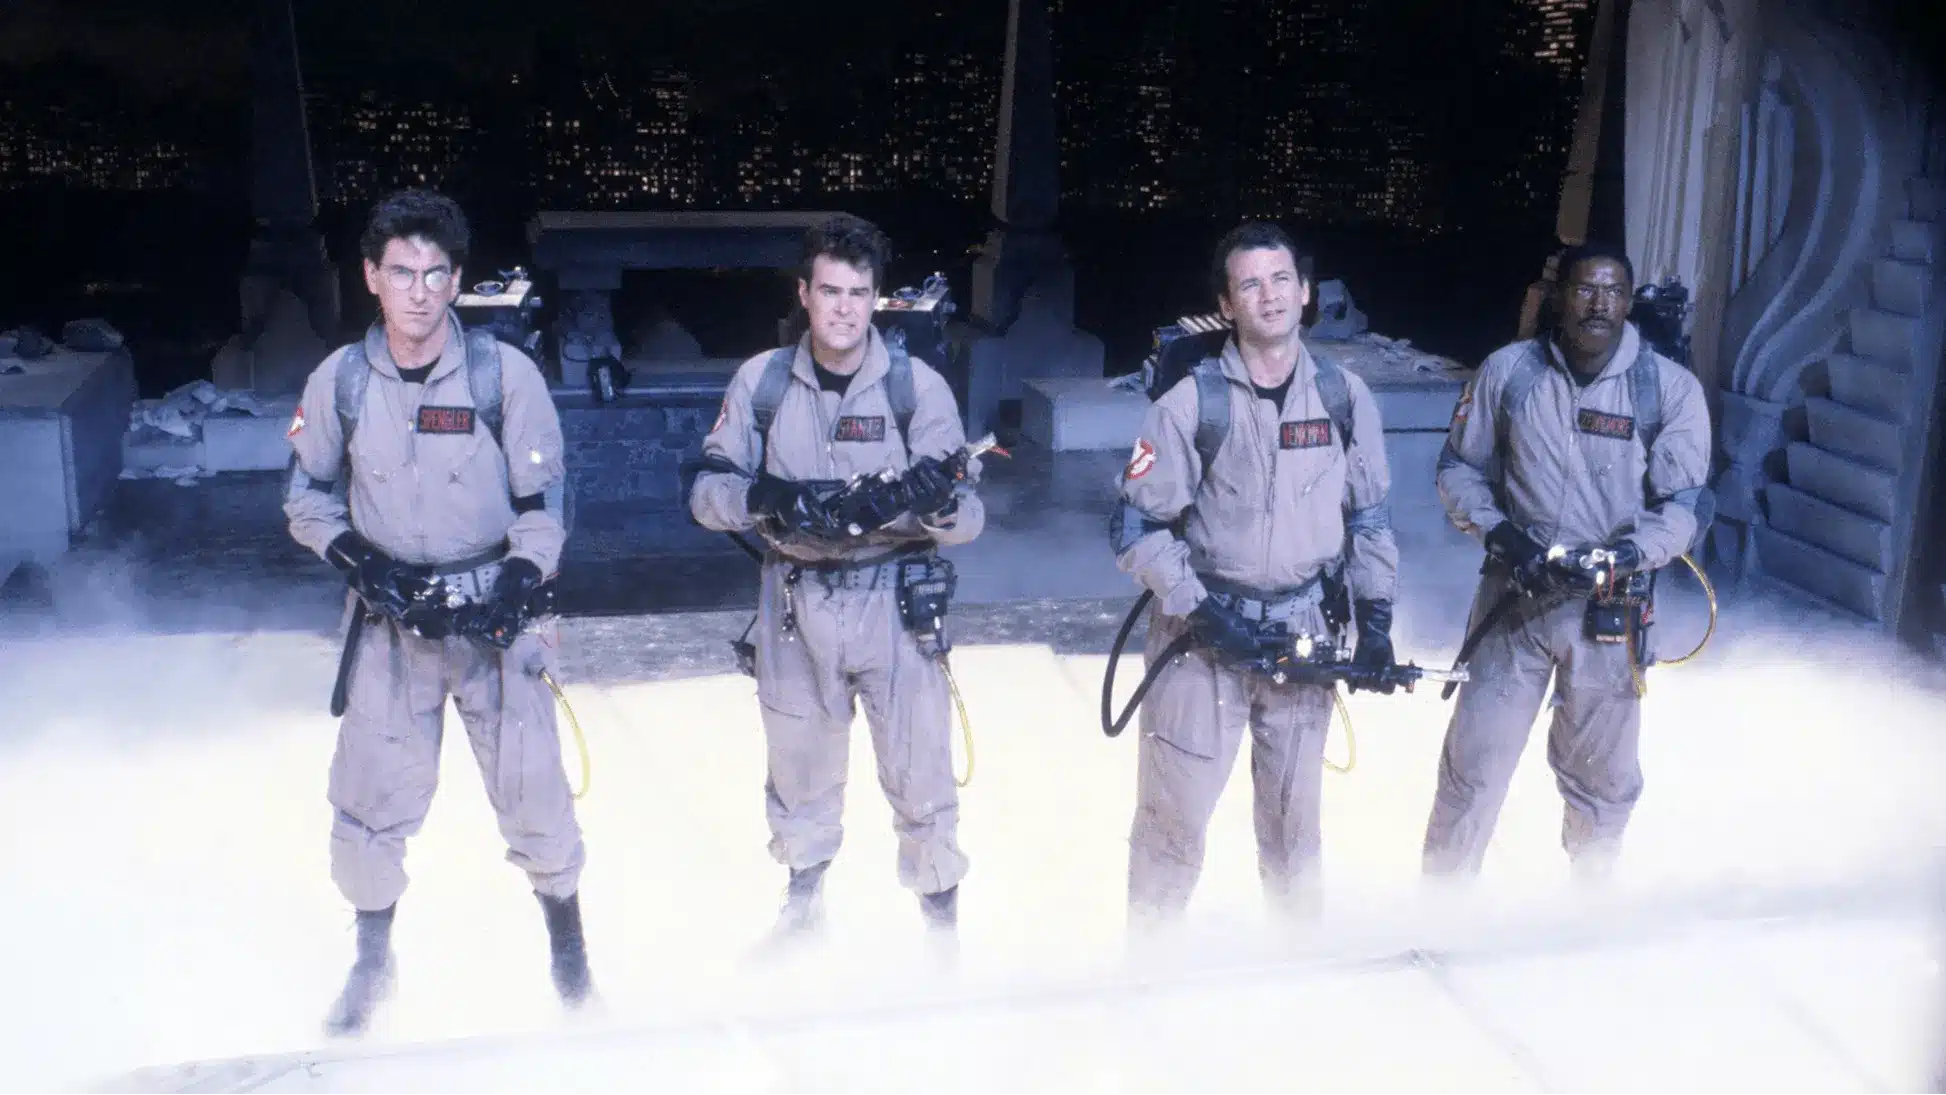 The 4 original ghostbusters in uniform with smoke surrounding their feet